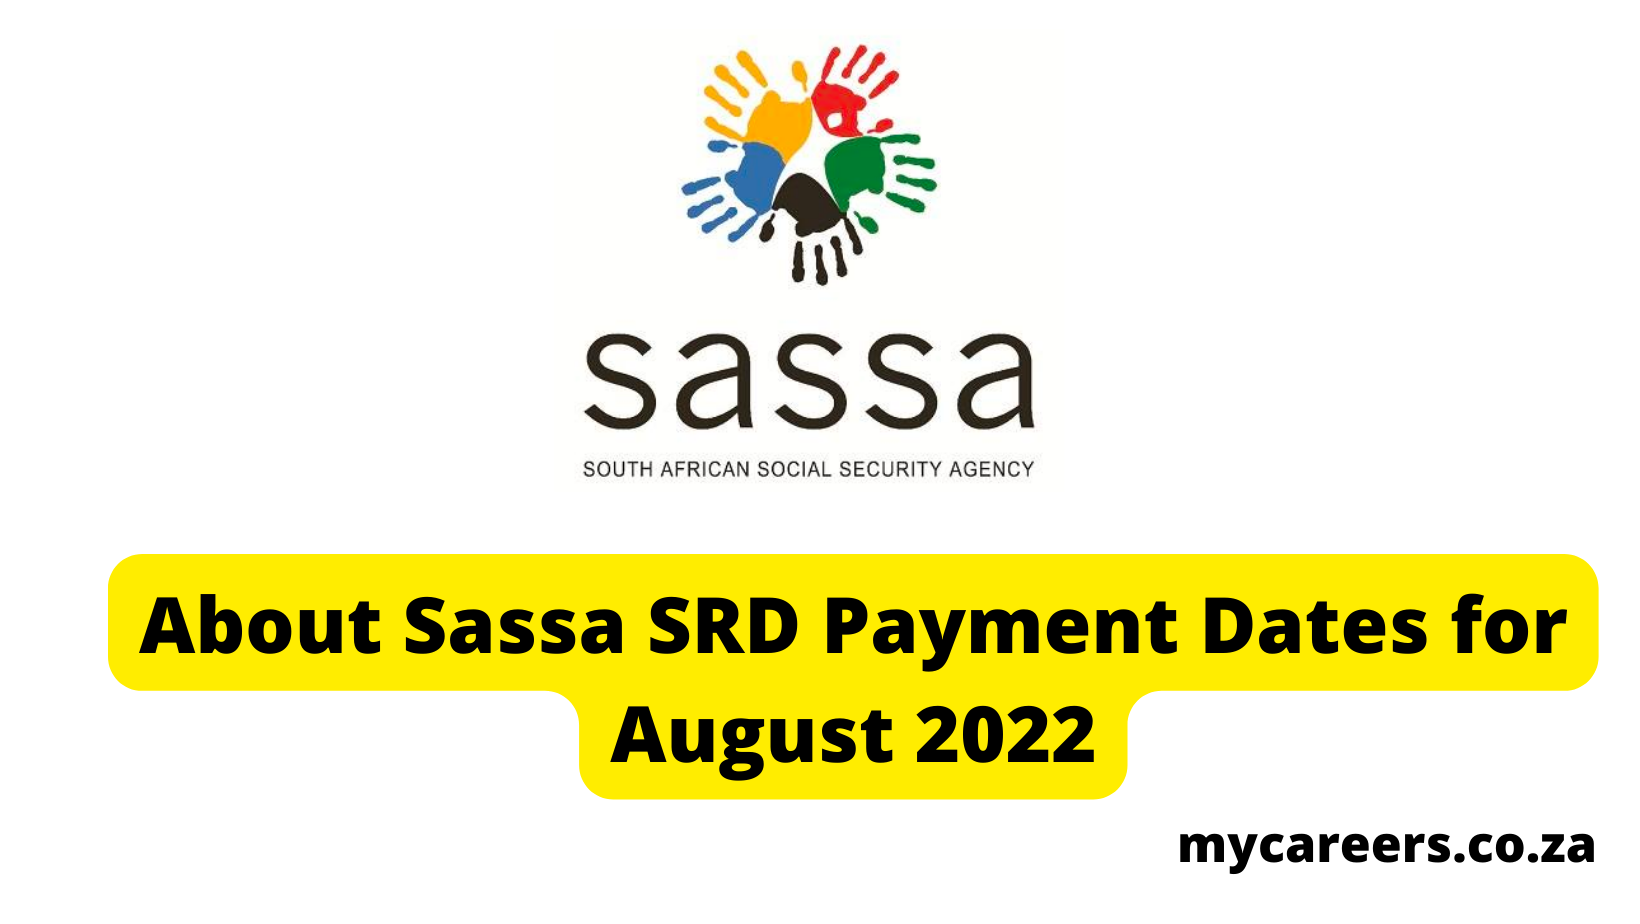 About Sassa SRD Payment Dates for August 2022